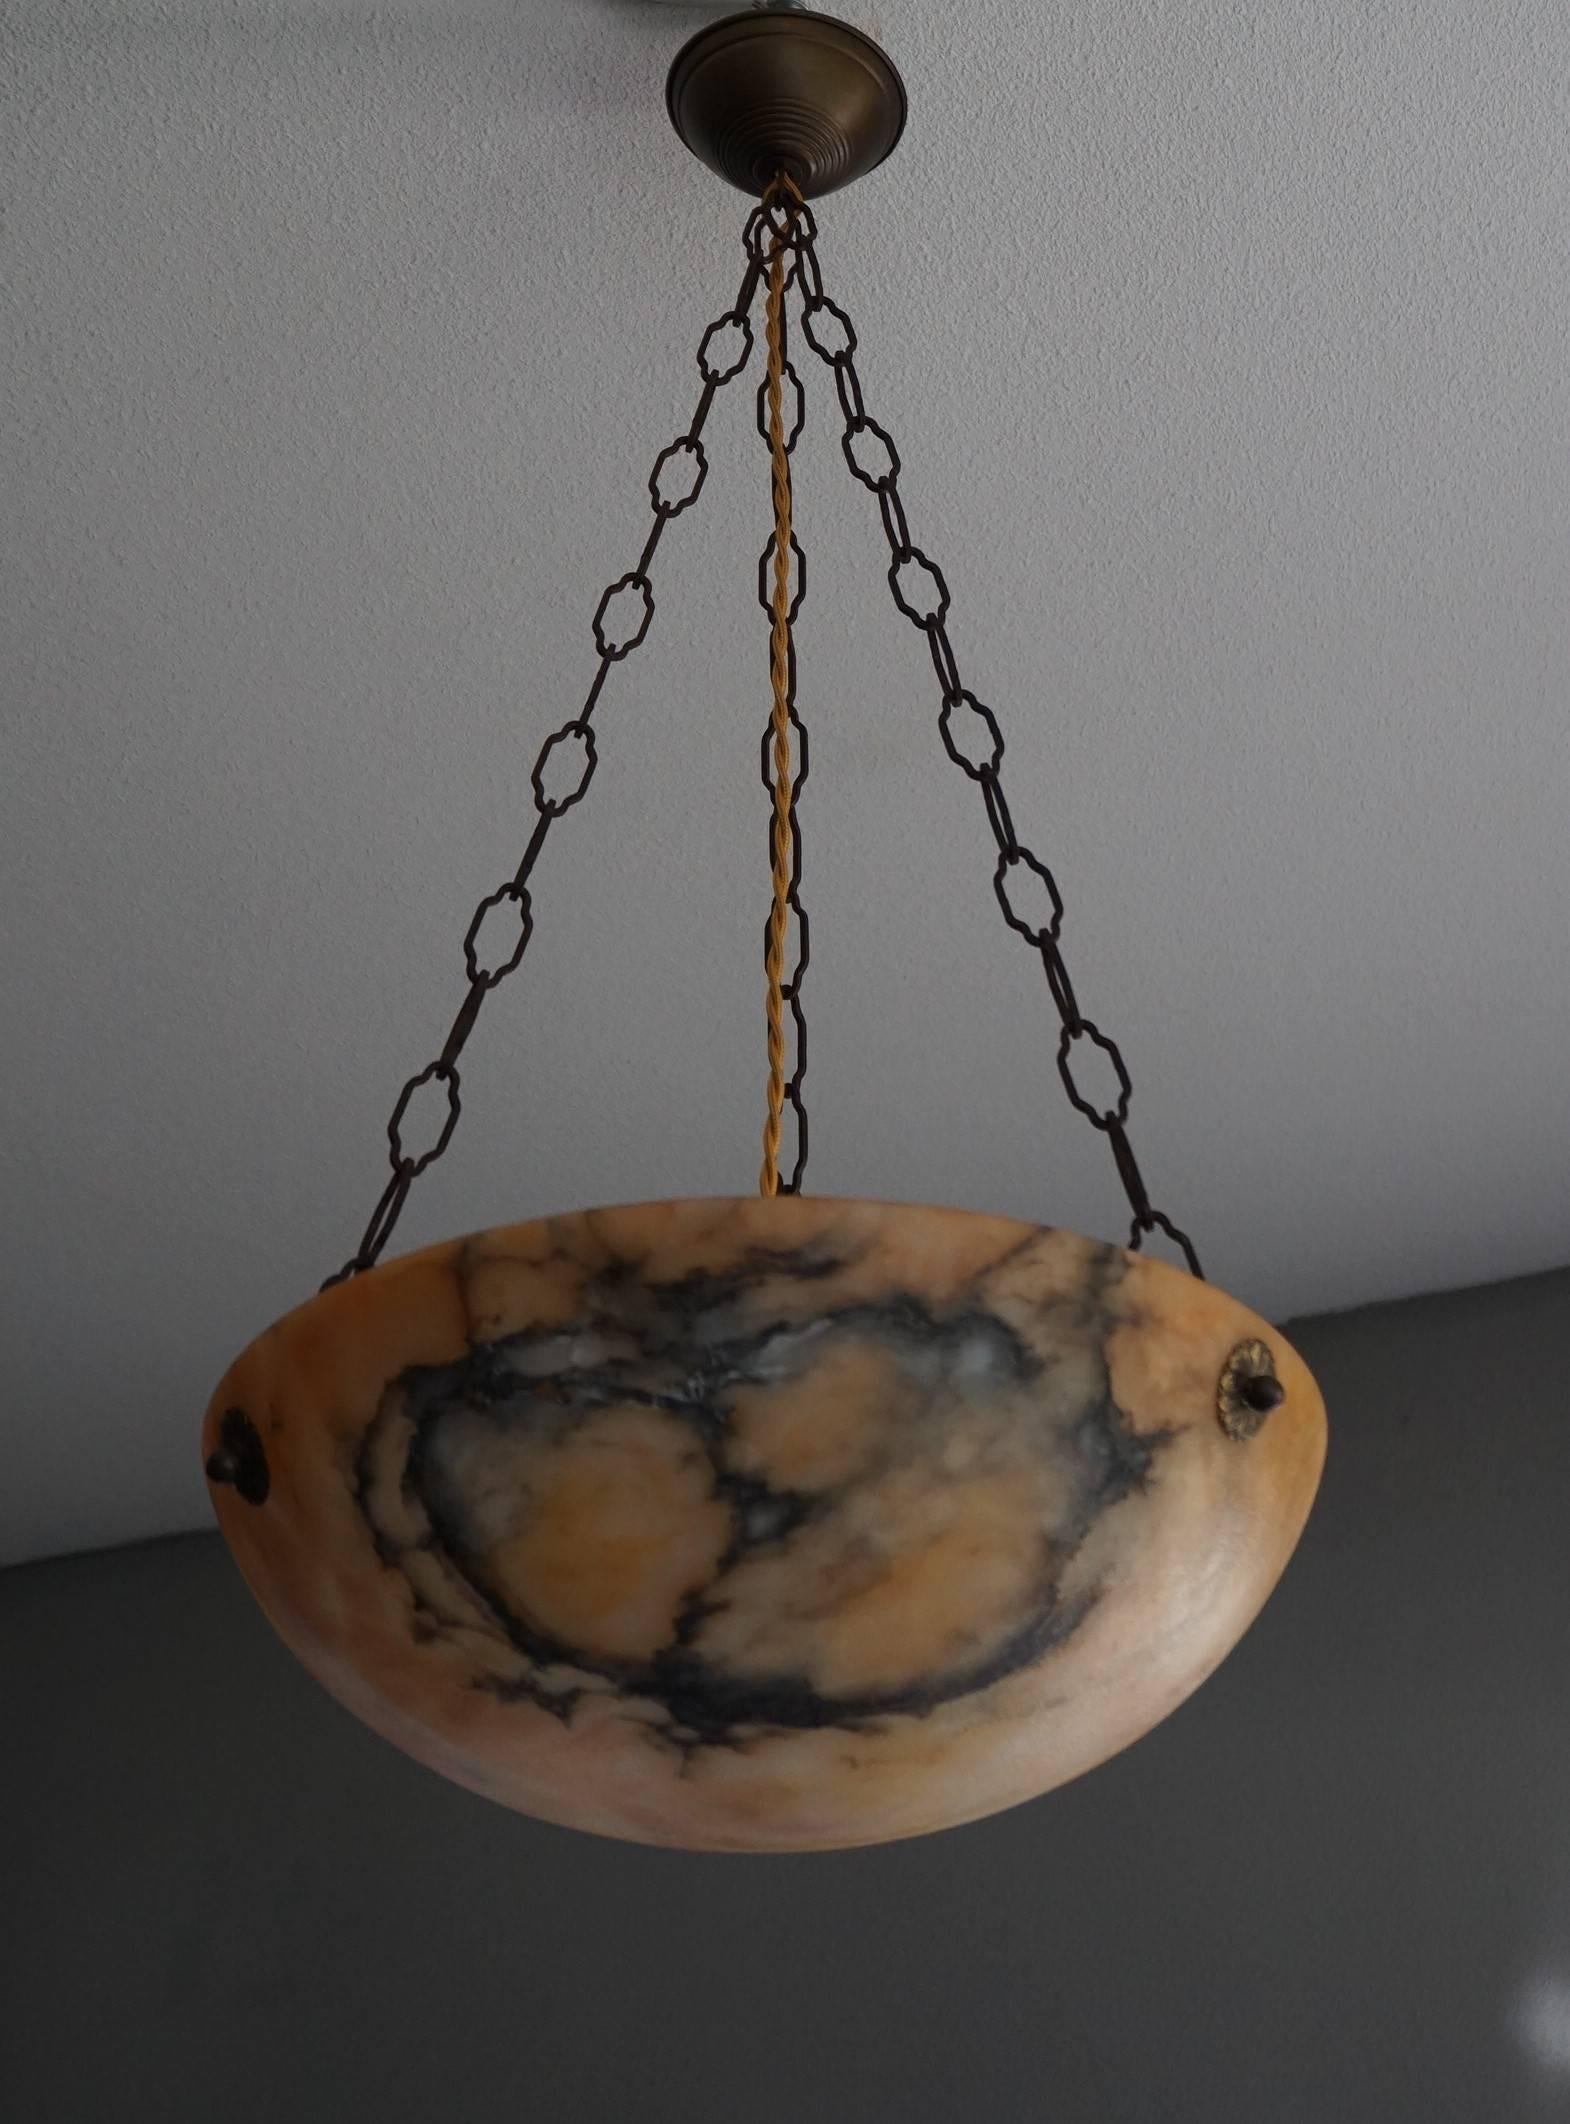 Well balanced and beautiful colored, antique pendant.

This antique alabaster pendant is an absolute joy to look at, both on and off. What makes this particular example stand out from all the others that we have seen and sold over the years, is the